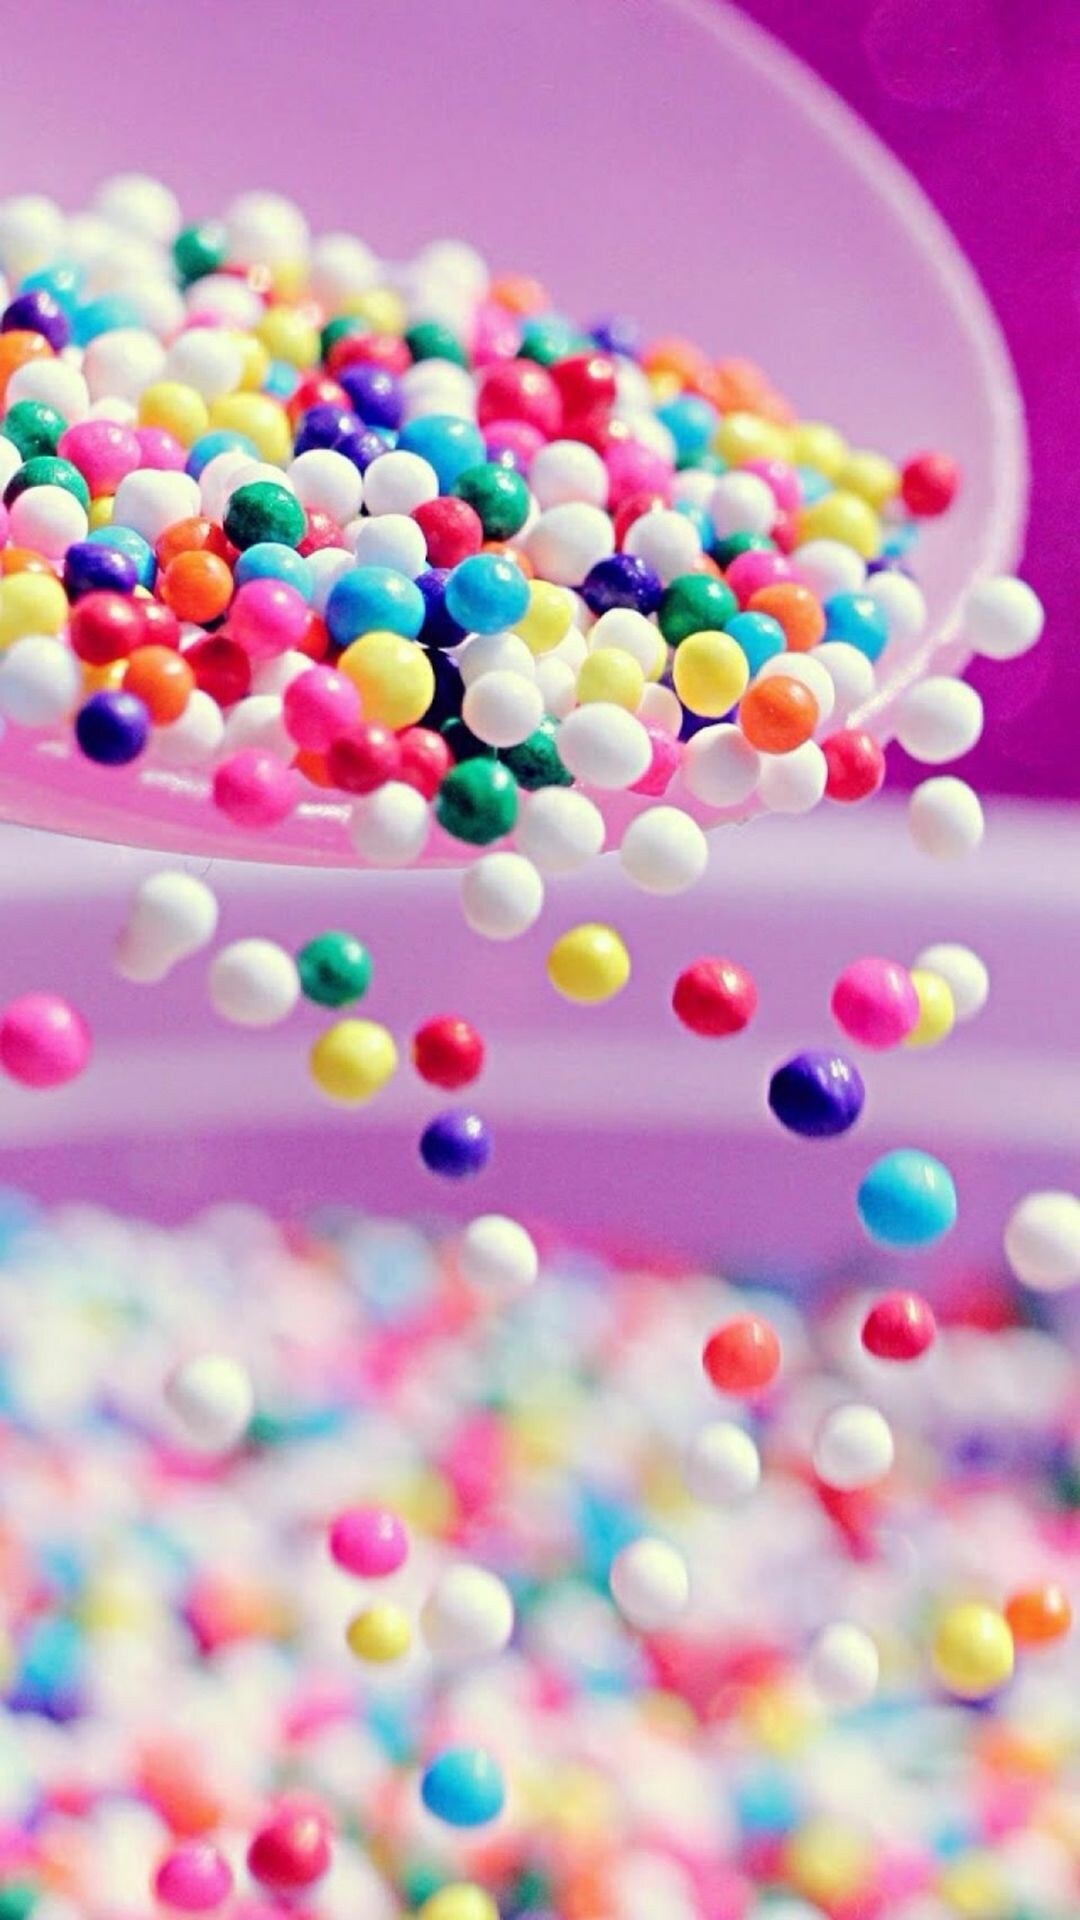 Sweets: Colorful bright candy beads, Confectionery. 1080x1920 Full HD Wallpaper.